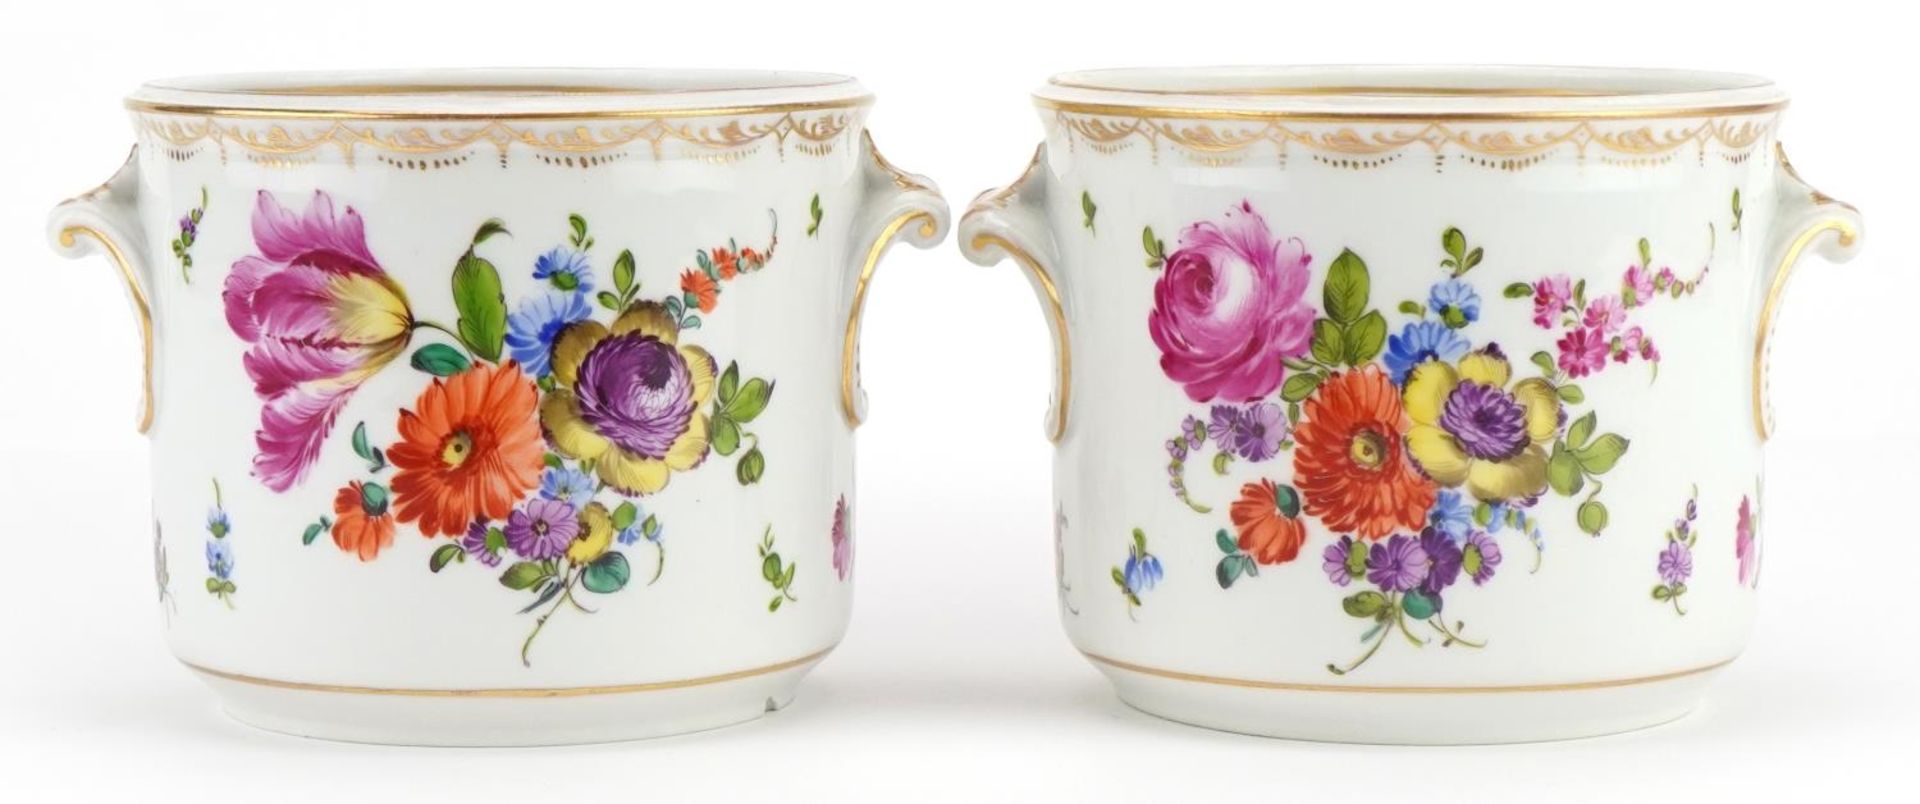 Augustus Rex, pair of German porcelain cache pots with twin handles, each hand painted with flowers, - Image 2 of 3